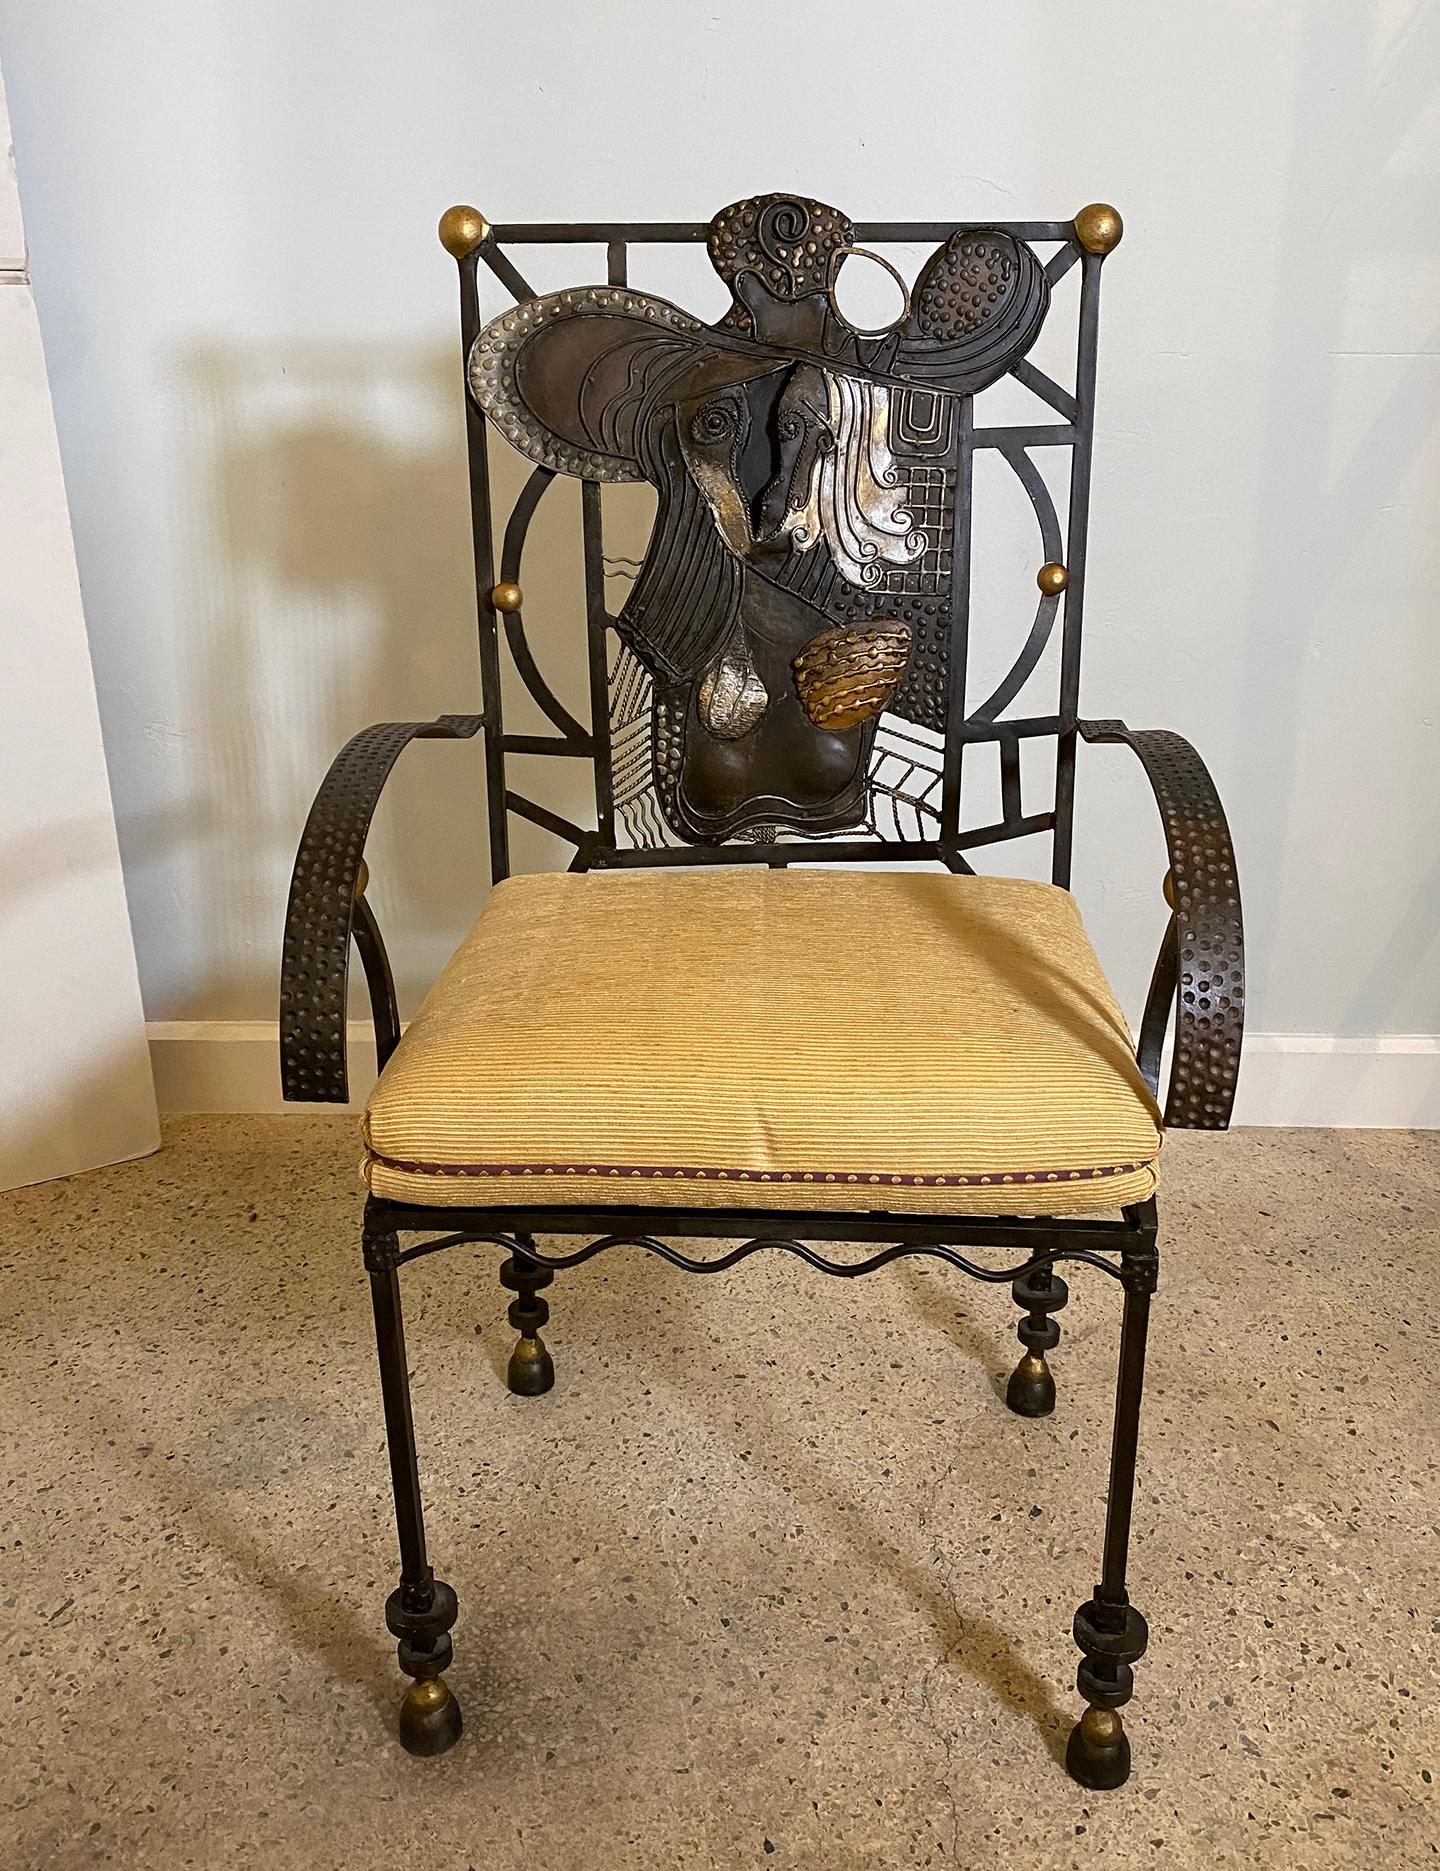 American modern surrealist armchair. Tall upright back over square seat with gilded spherical connectors and an applied surrealist back design. Design is multilevel with abstractxxxxxxxxxxxxxxxxxxxxxxxxxx.